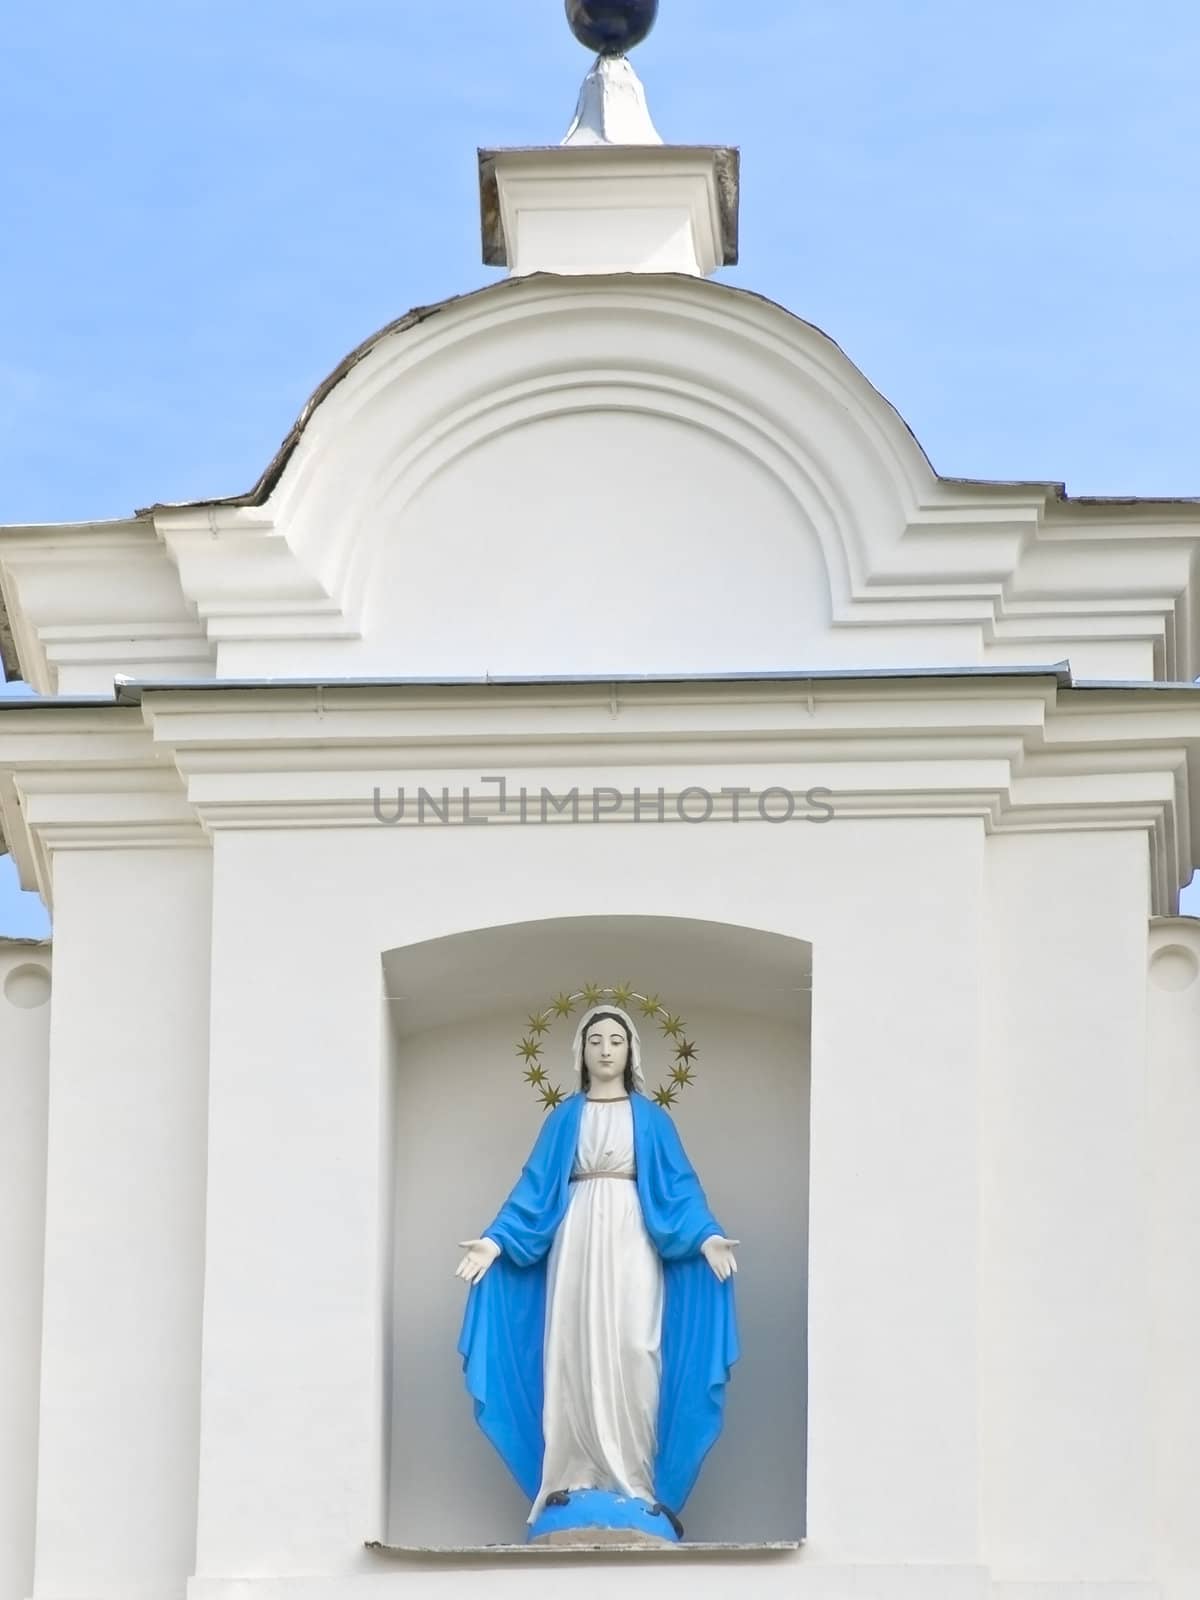 Church image on the front of a building